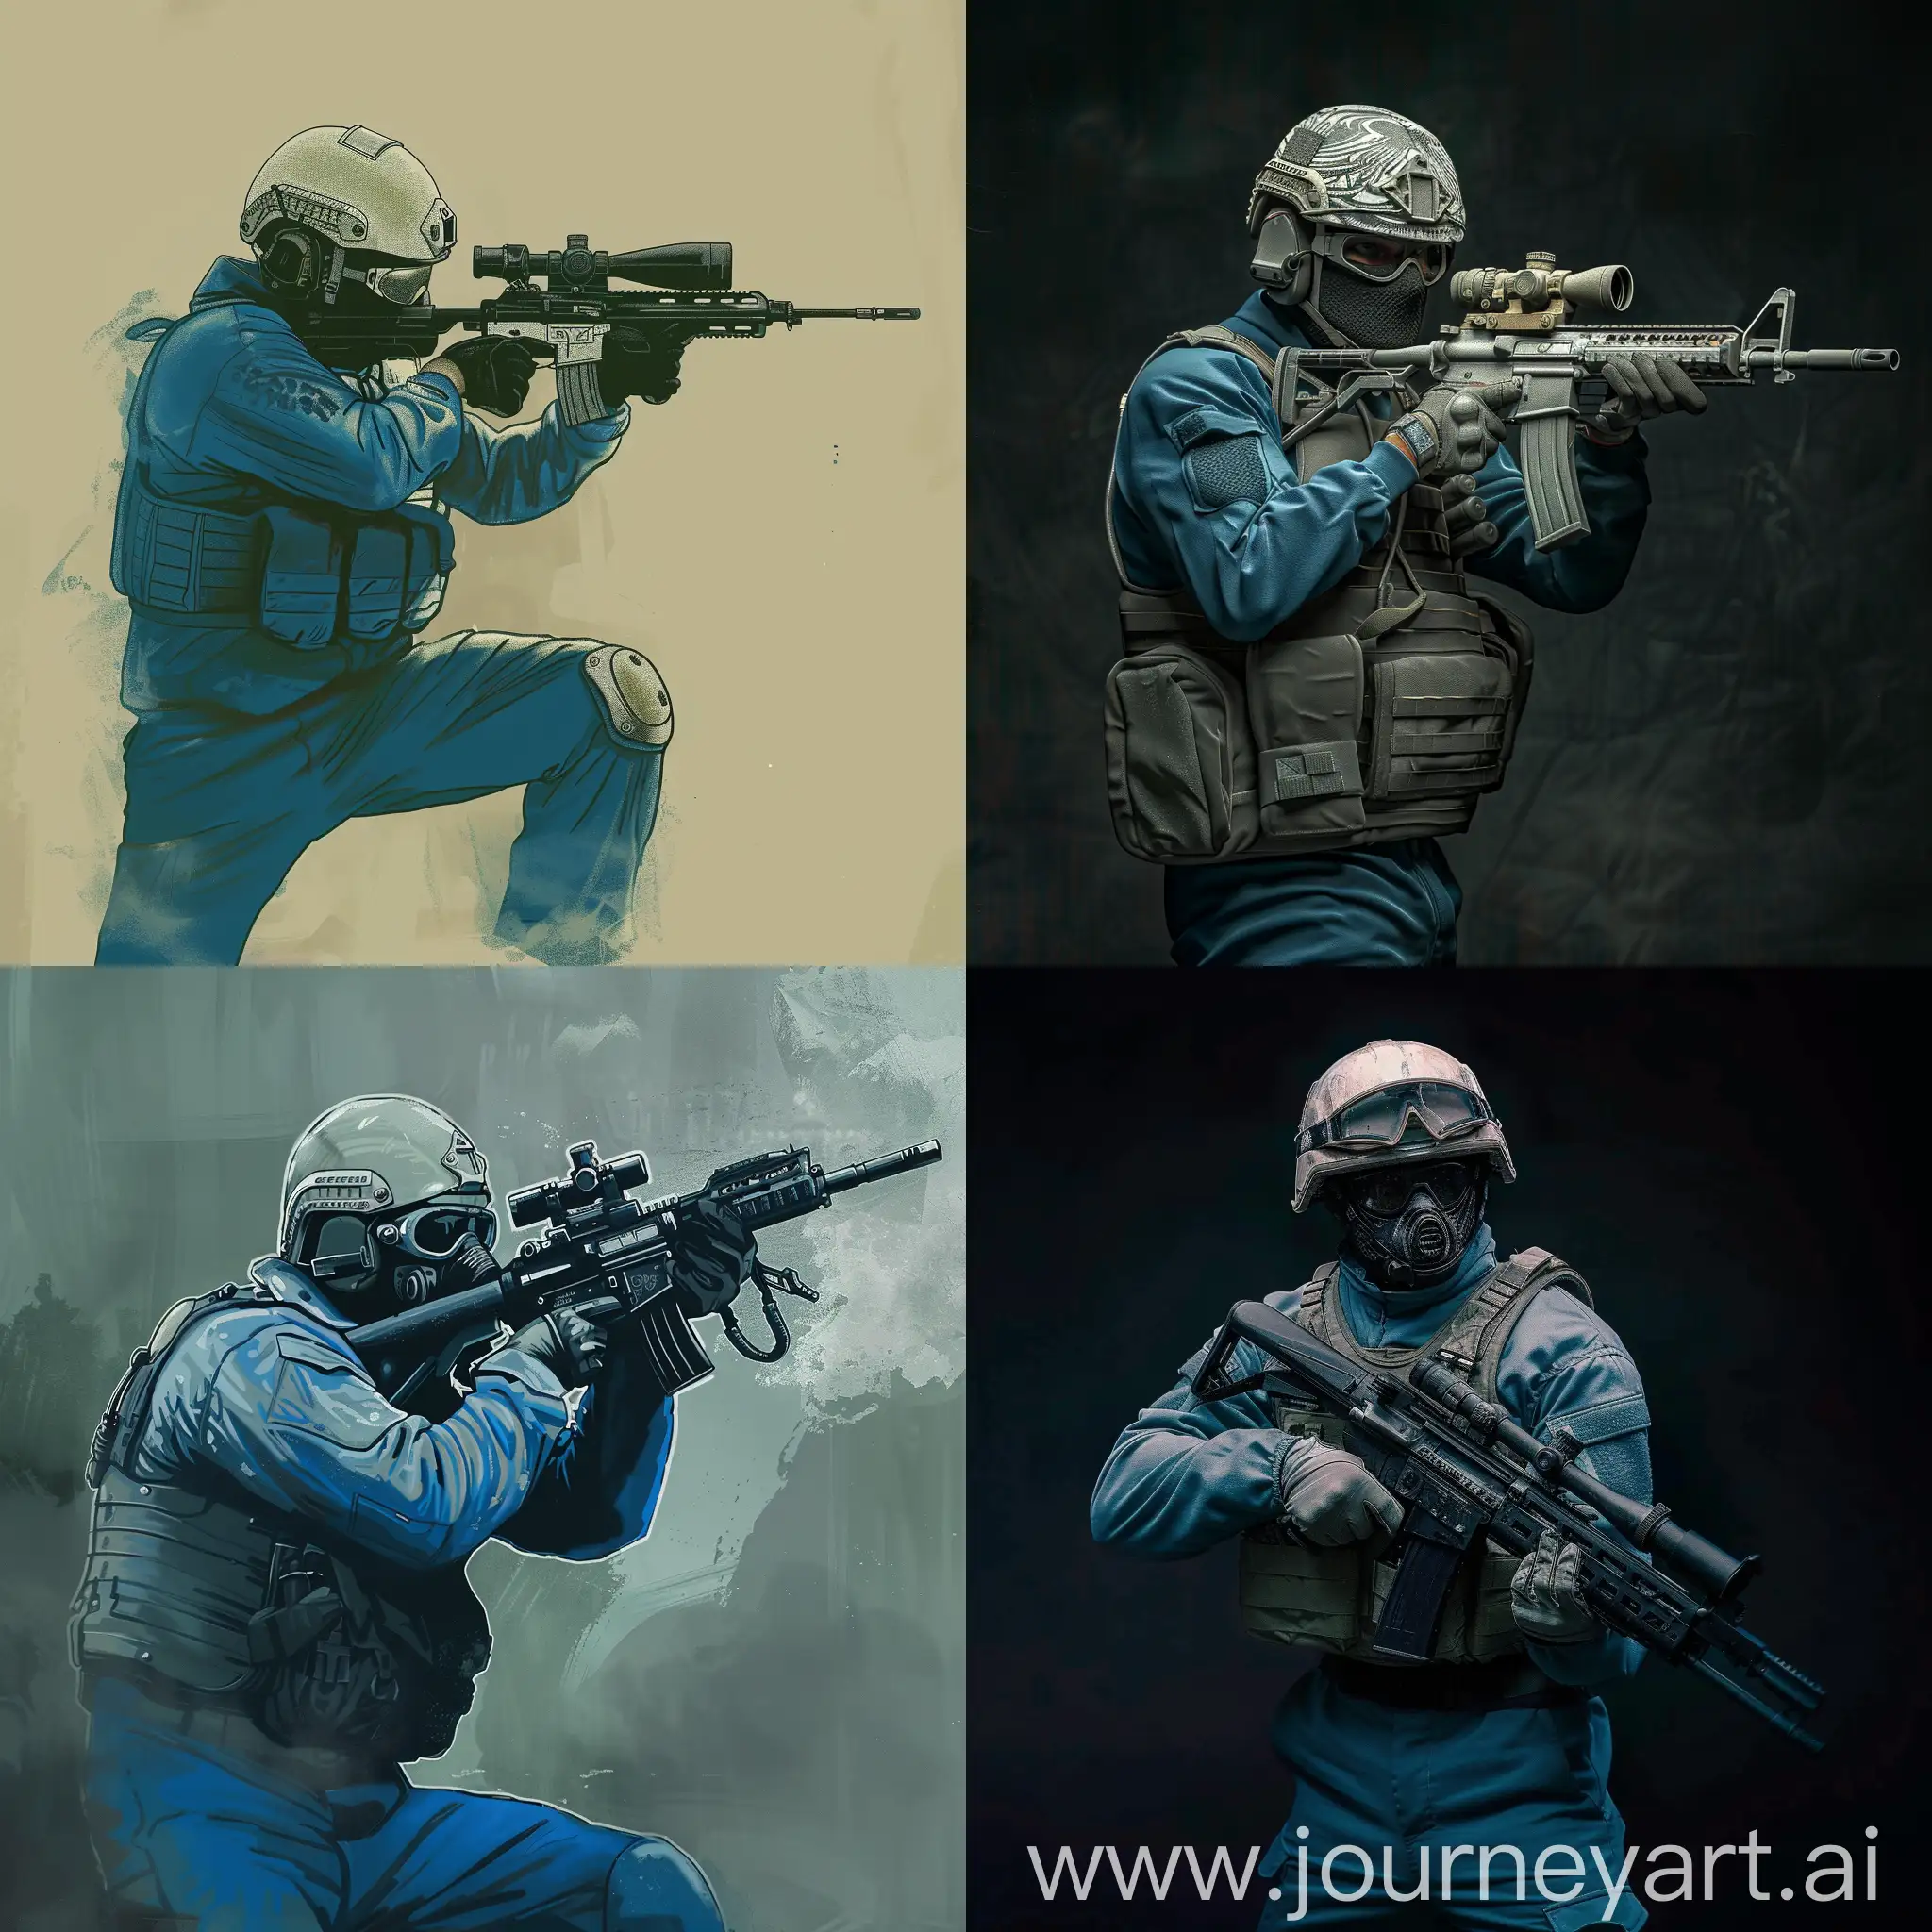 Stalker-in-BlueGreen-Camouflage-with-Sniper-Rifle